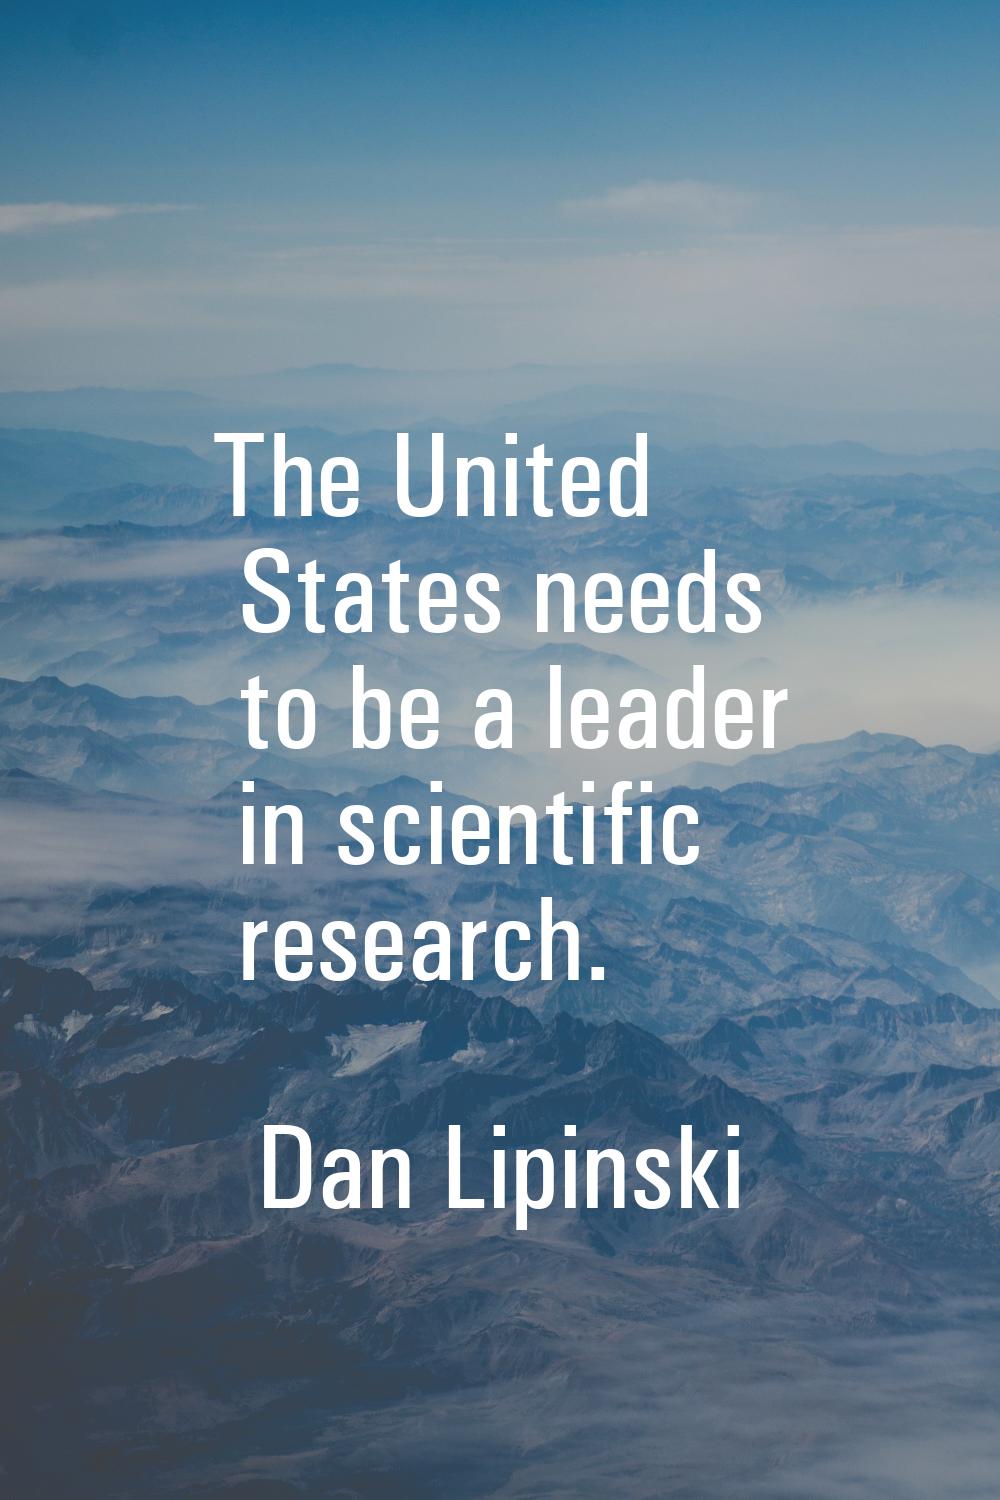 The United States needs to be a leader in scientific research.